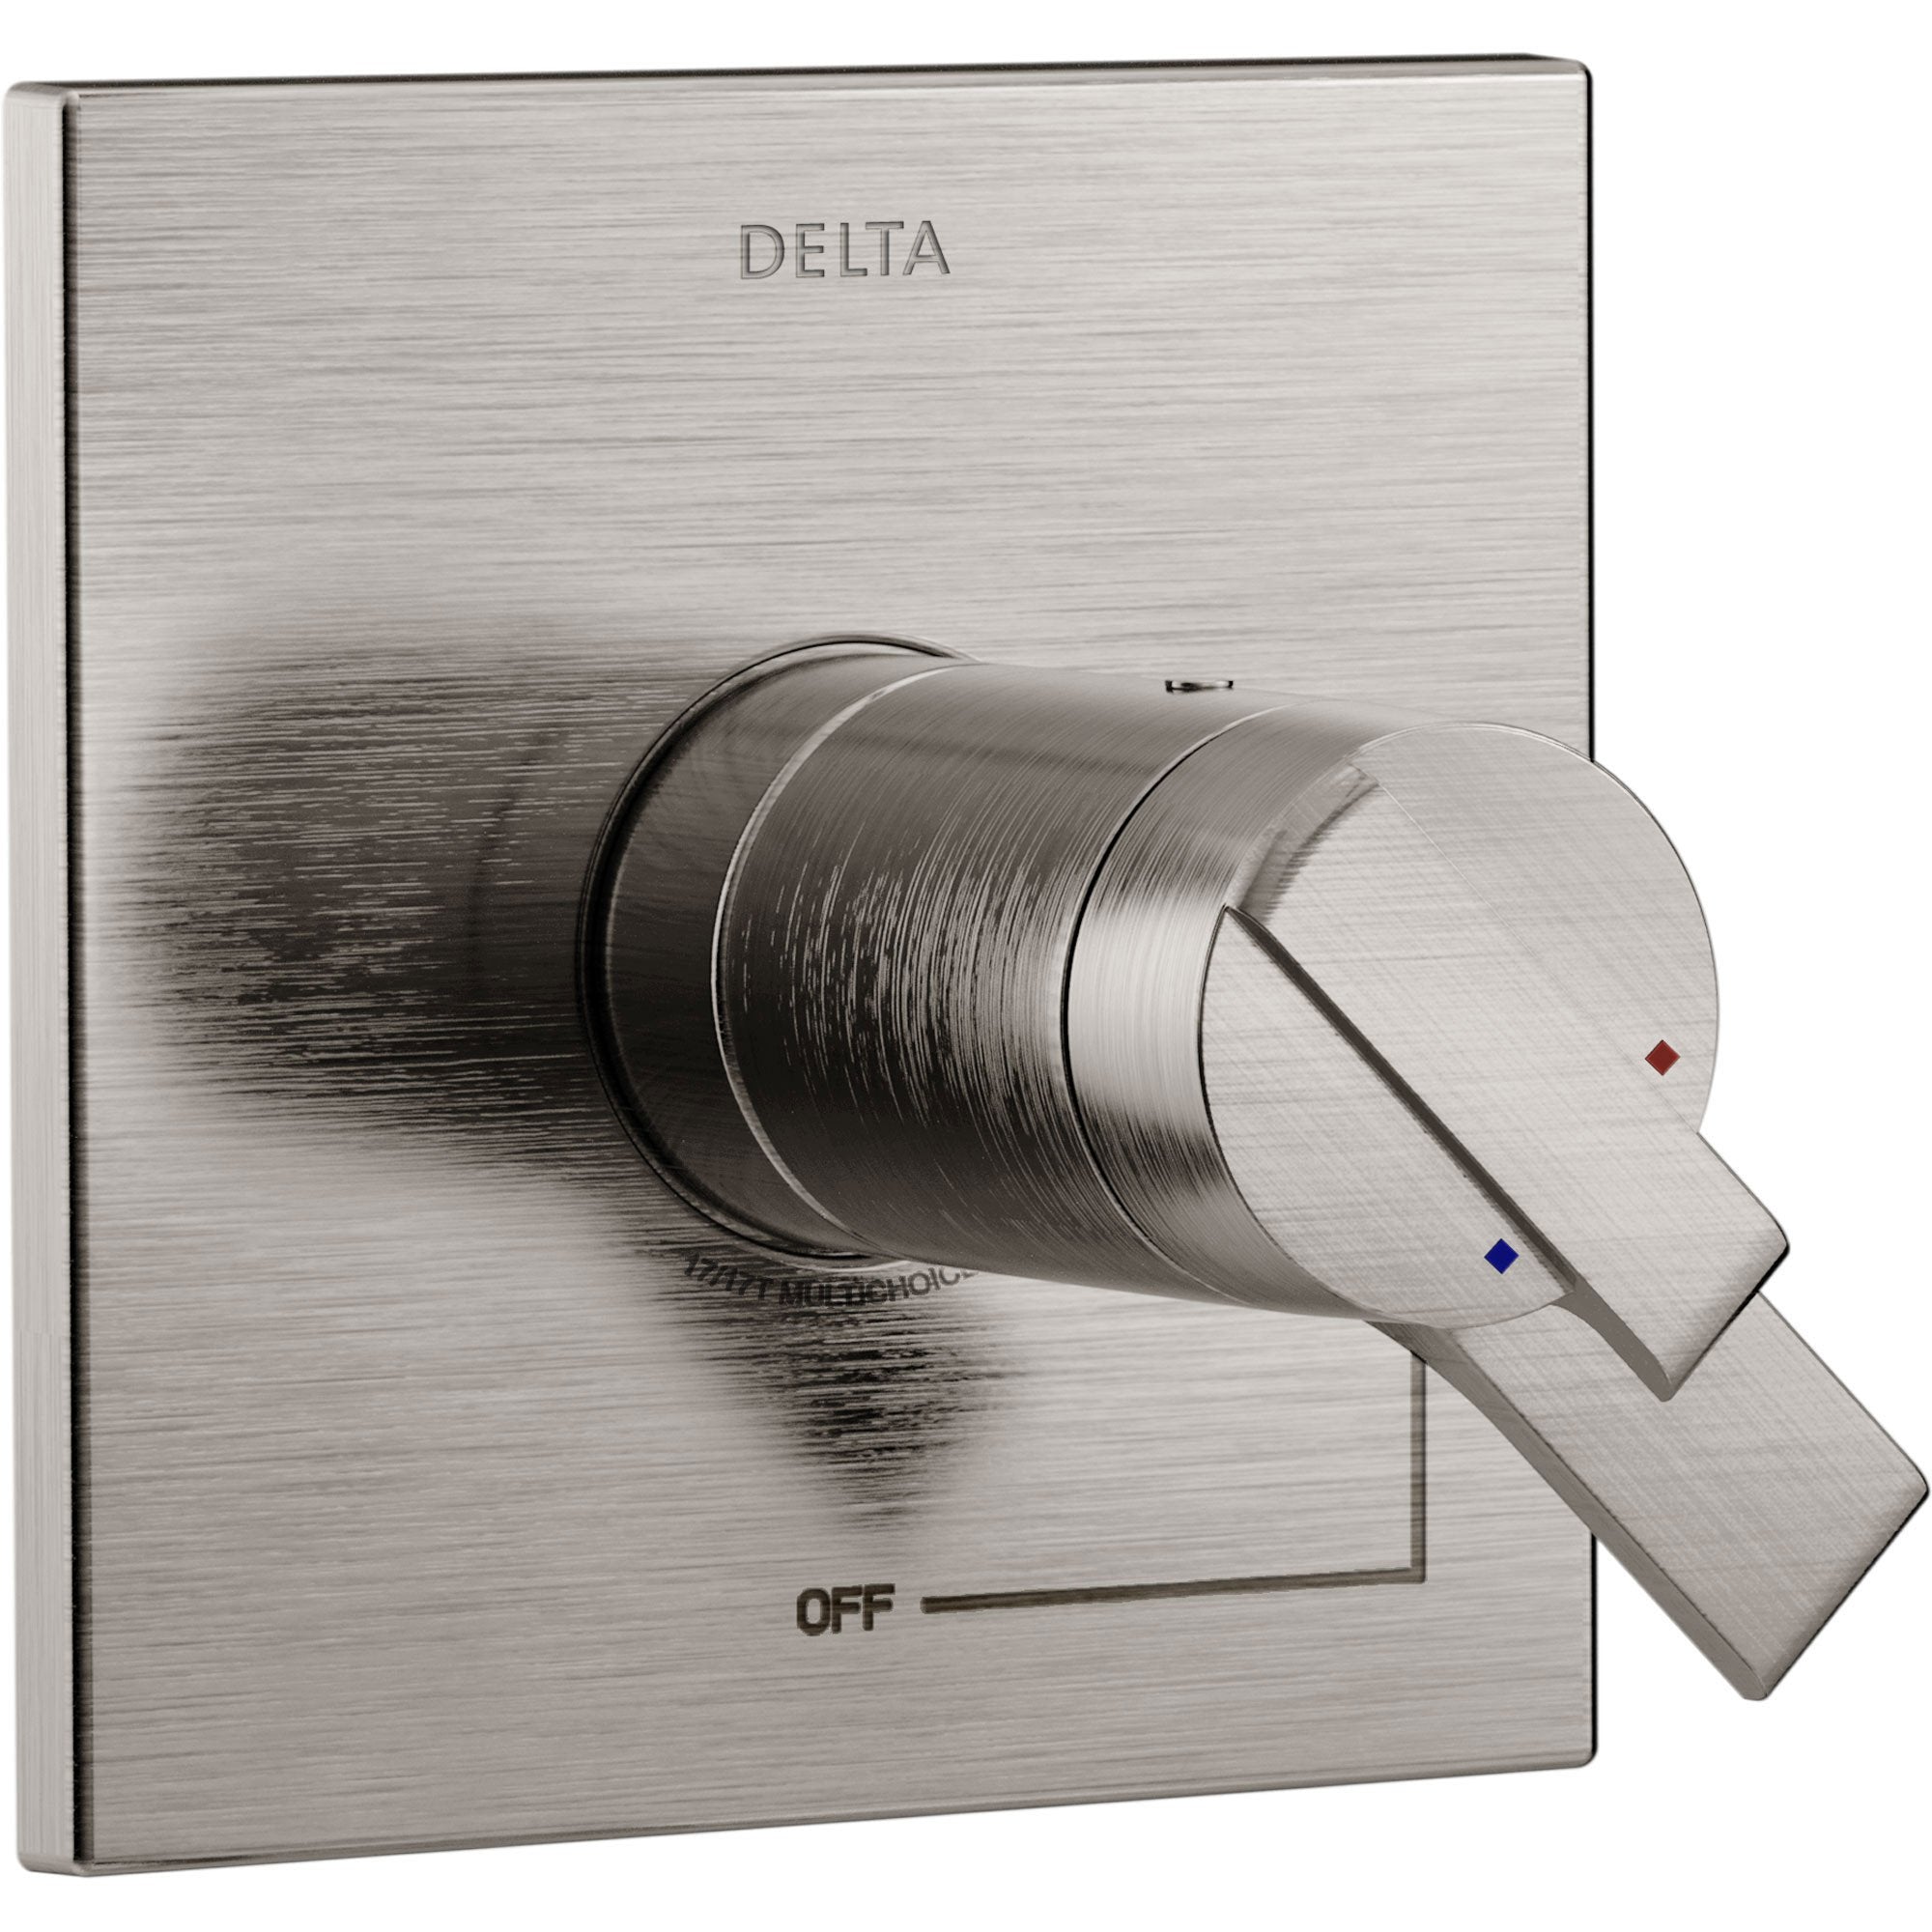 Delta Ara Modern Stainless Steel Finish TempAssure 17T Dual Temperature and Pressure Shower Faucet Control INCLUDES Rough-in Valve with Stops D1109V